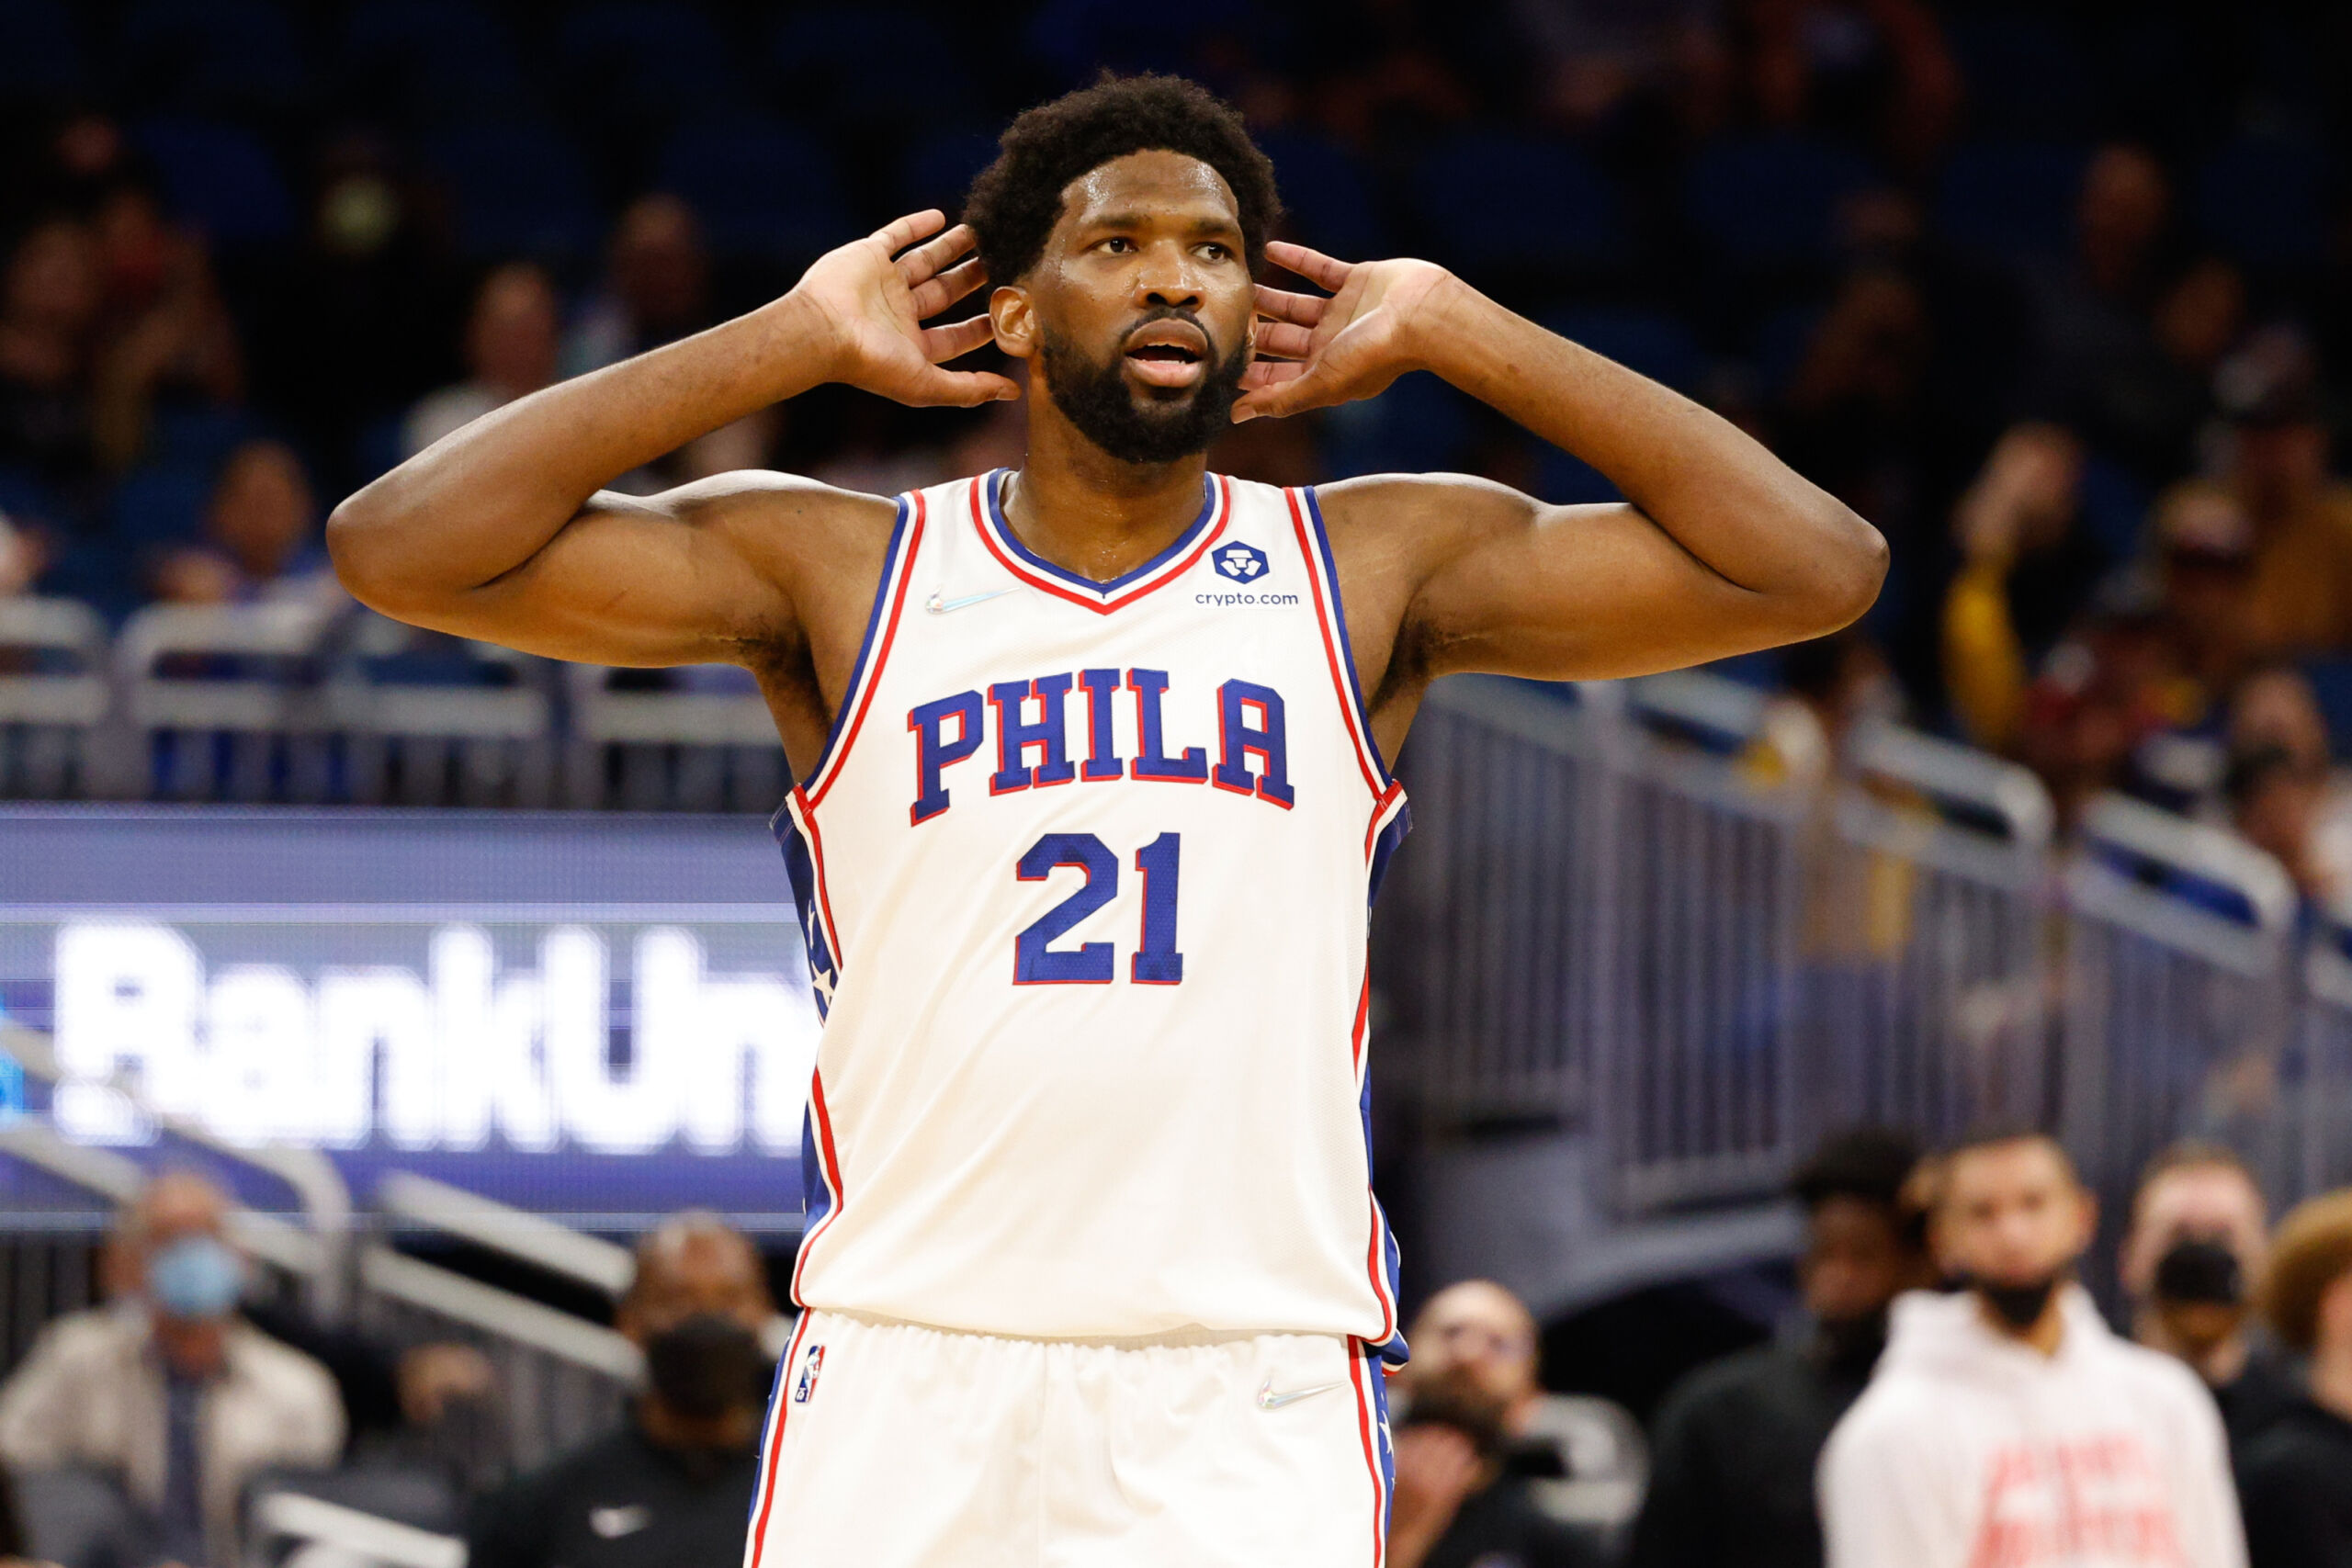 Sixers' Joel Embiid officially out vs. Heat - Liberty Ballers